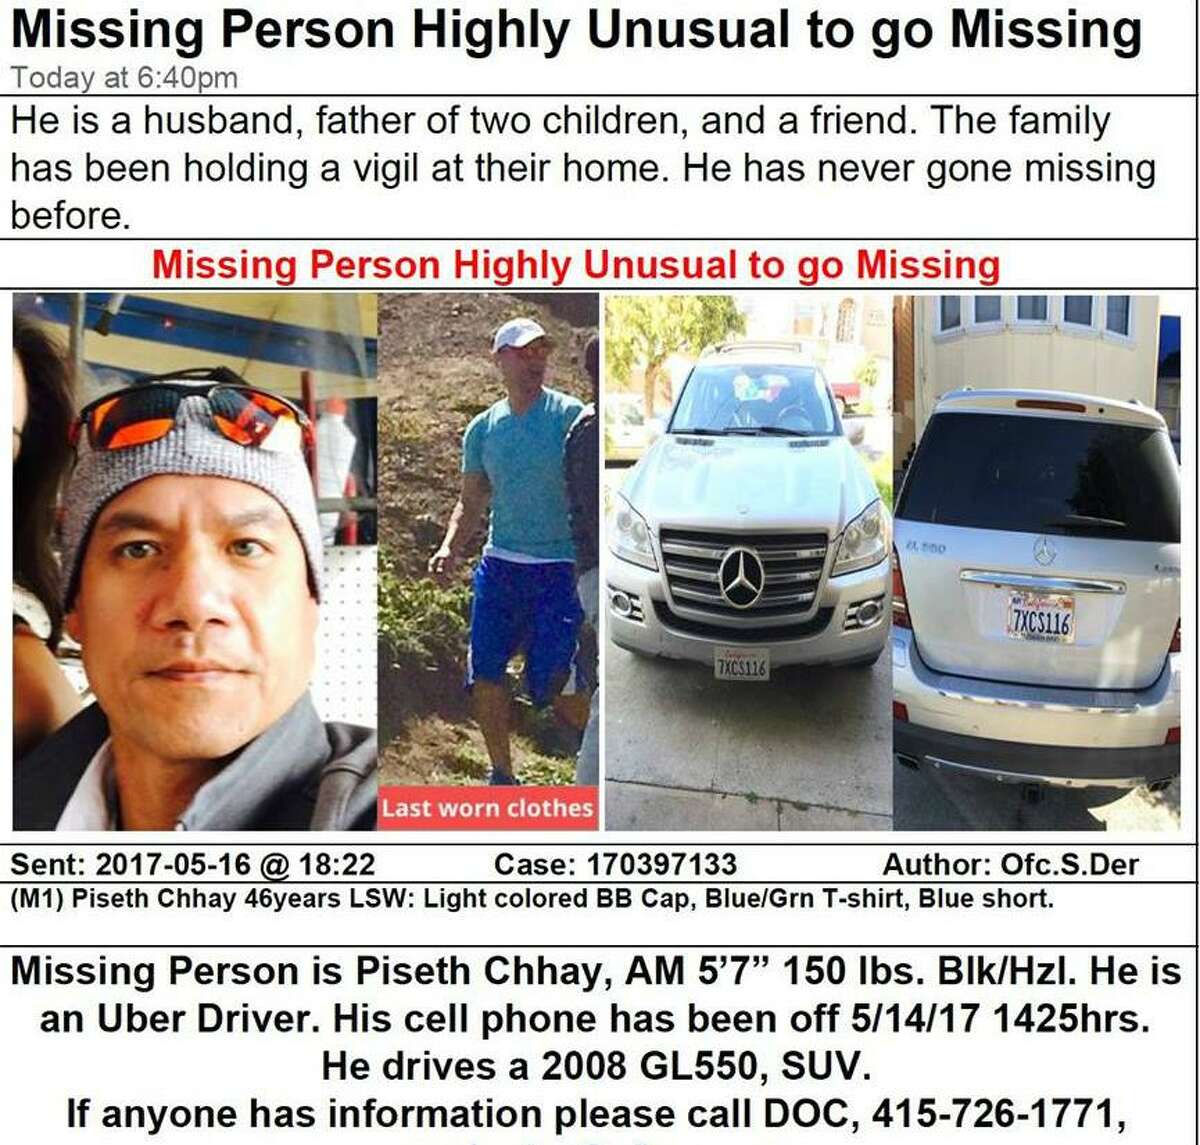 Piseth Chhay, an Uber driver from San Francisco, was last seen on May 14. His silver 2008 Mercedes SUV was found abandoned near a homeless encampment in the Bayview.